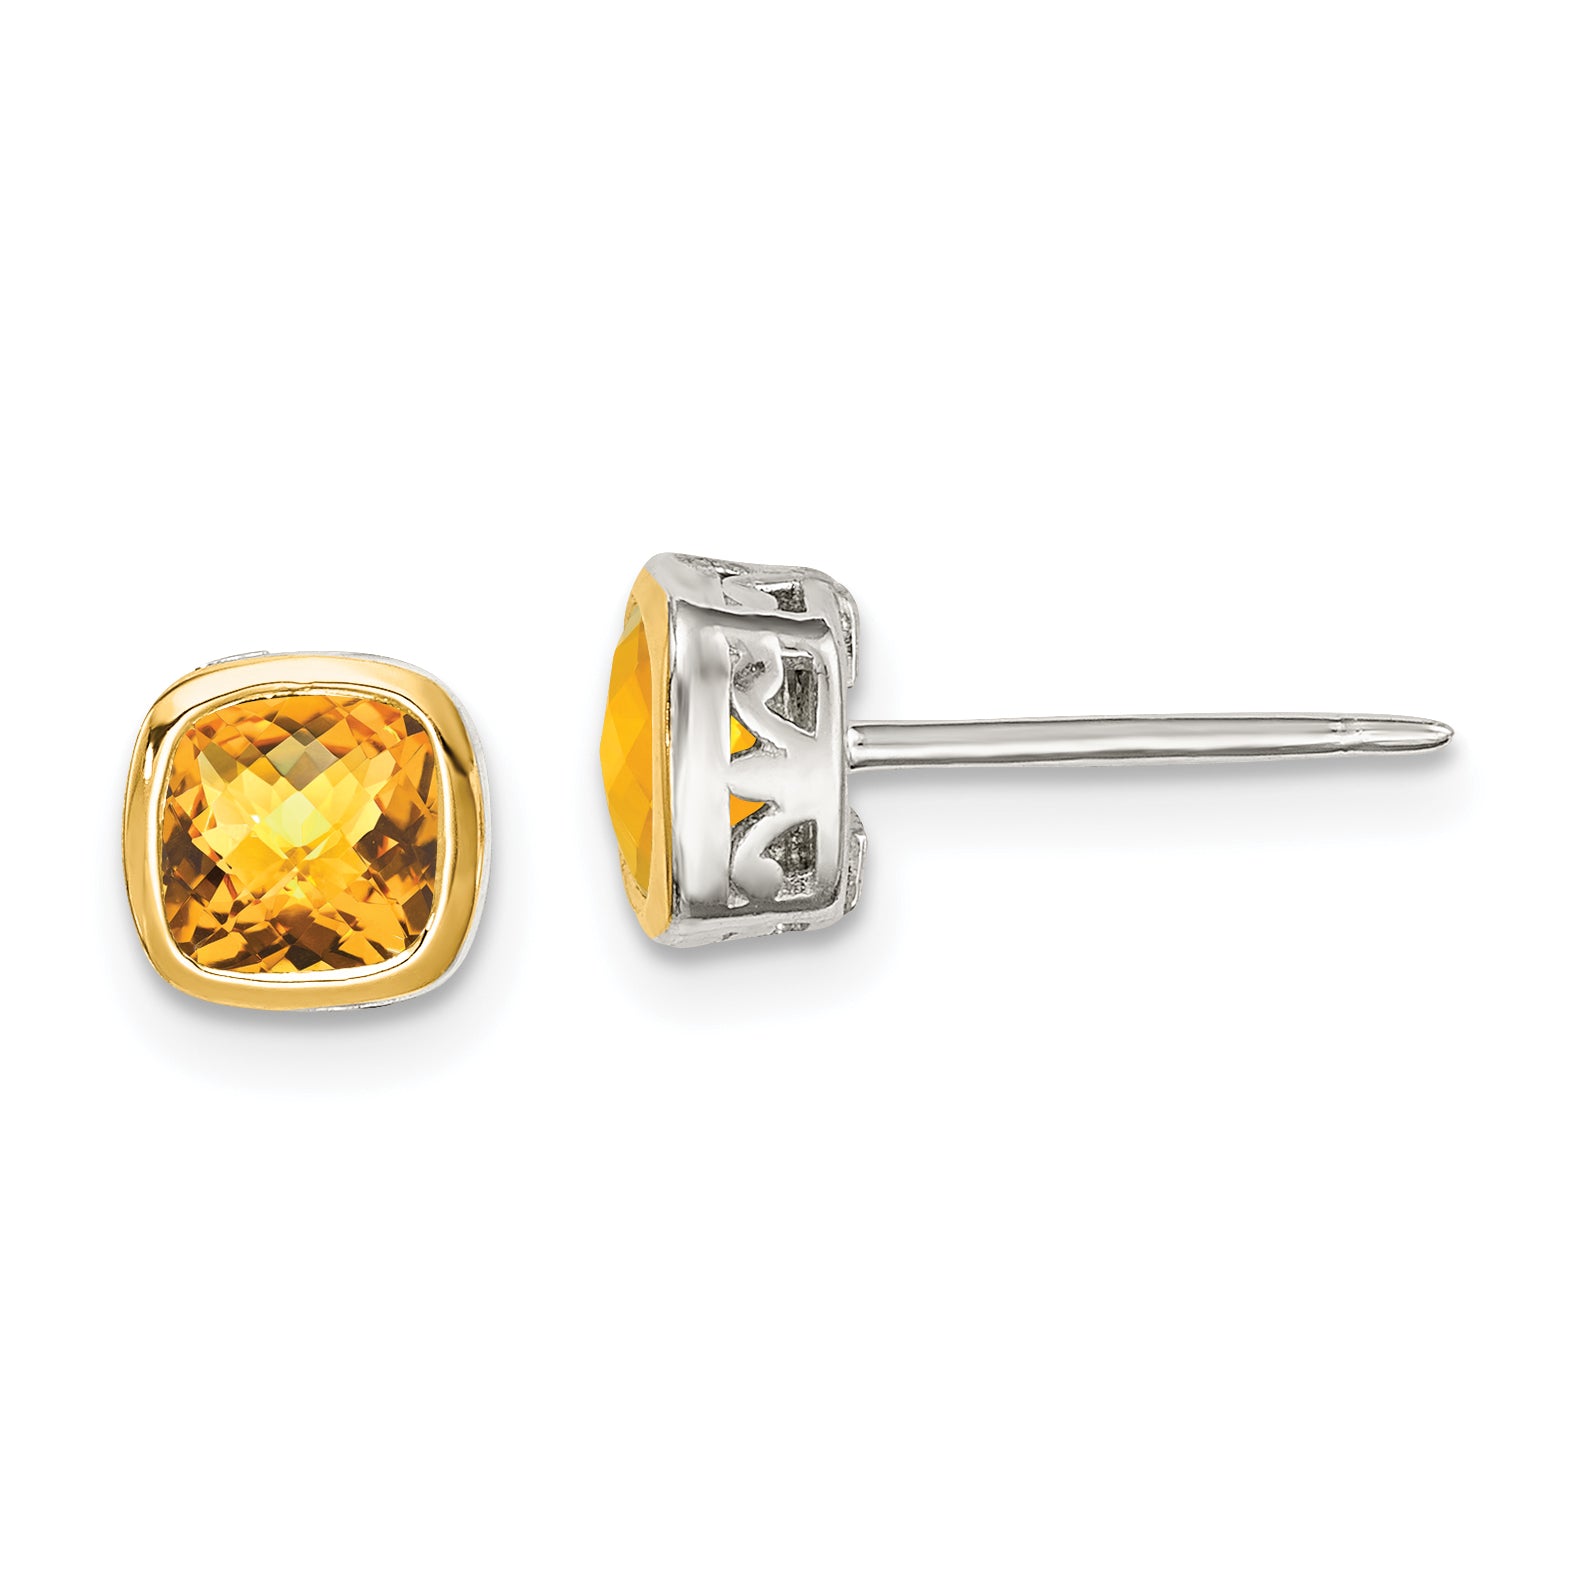 Shey Couture Sterling Silver Rhodium-plated with 14k Accent Citrine Square Stud Earrings